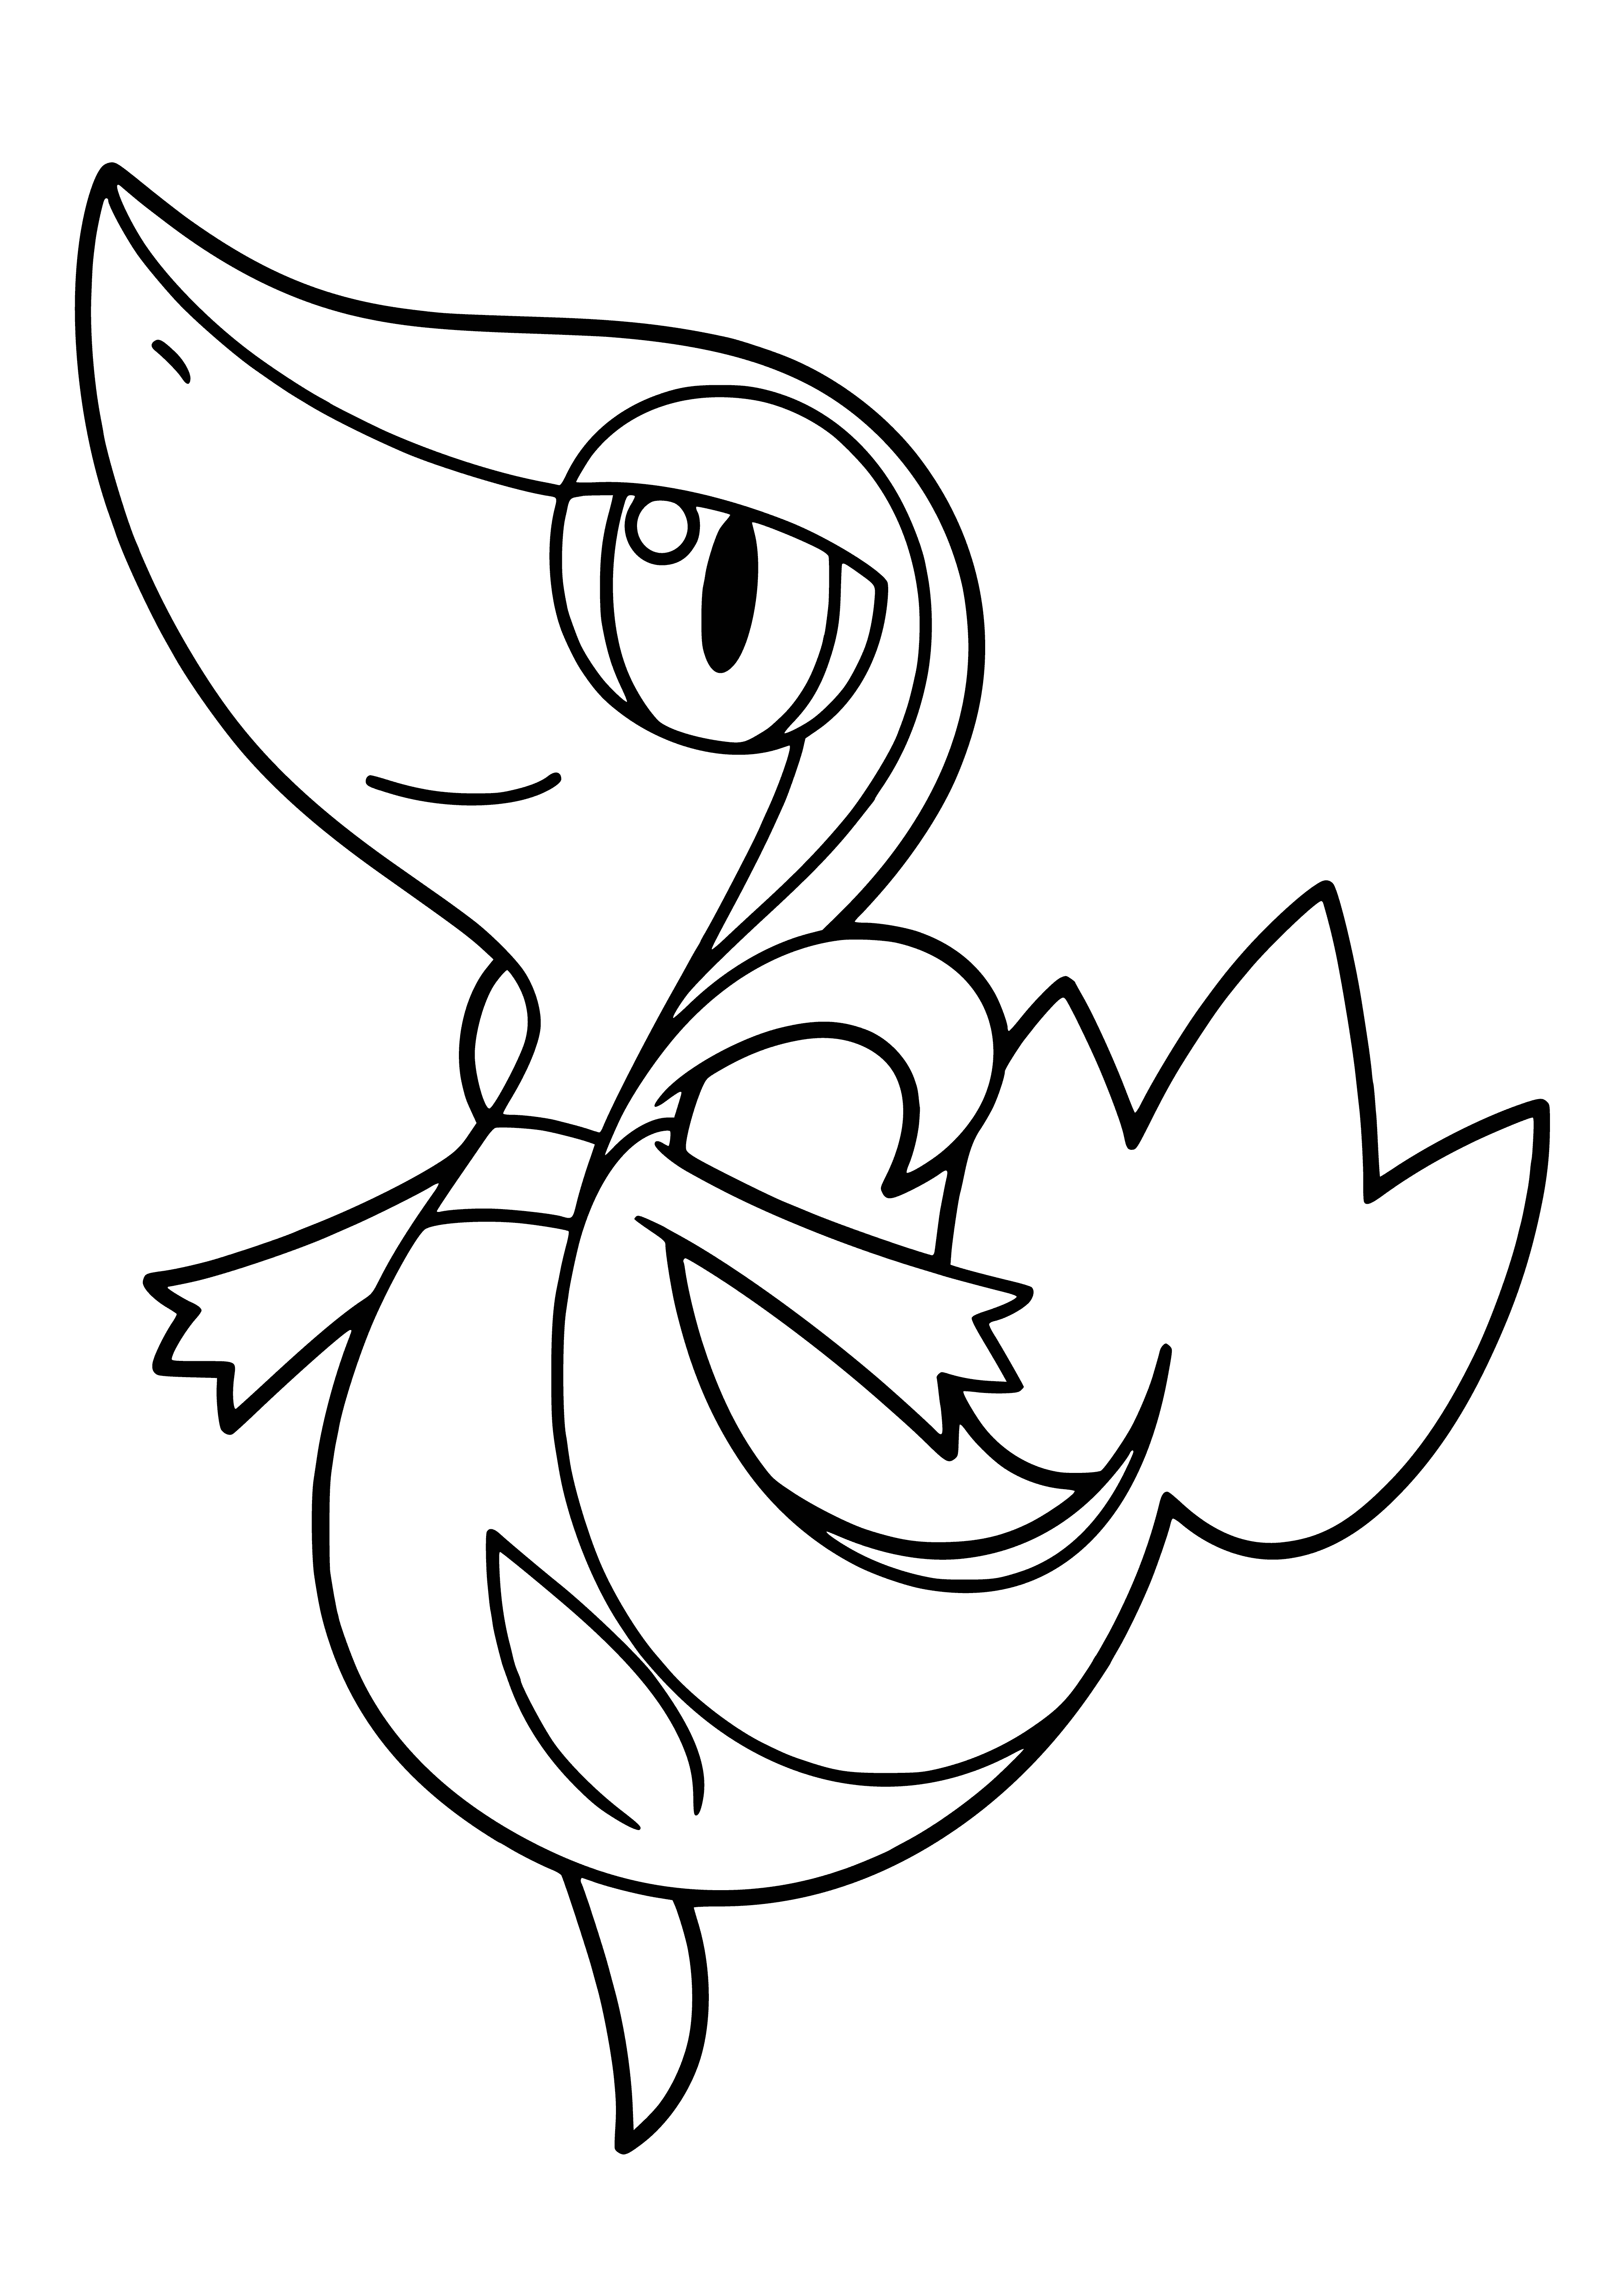 Pokemon Snivy coloring page